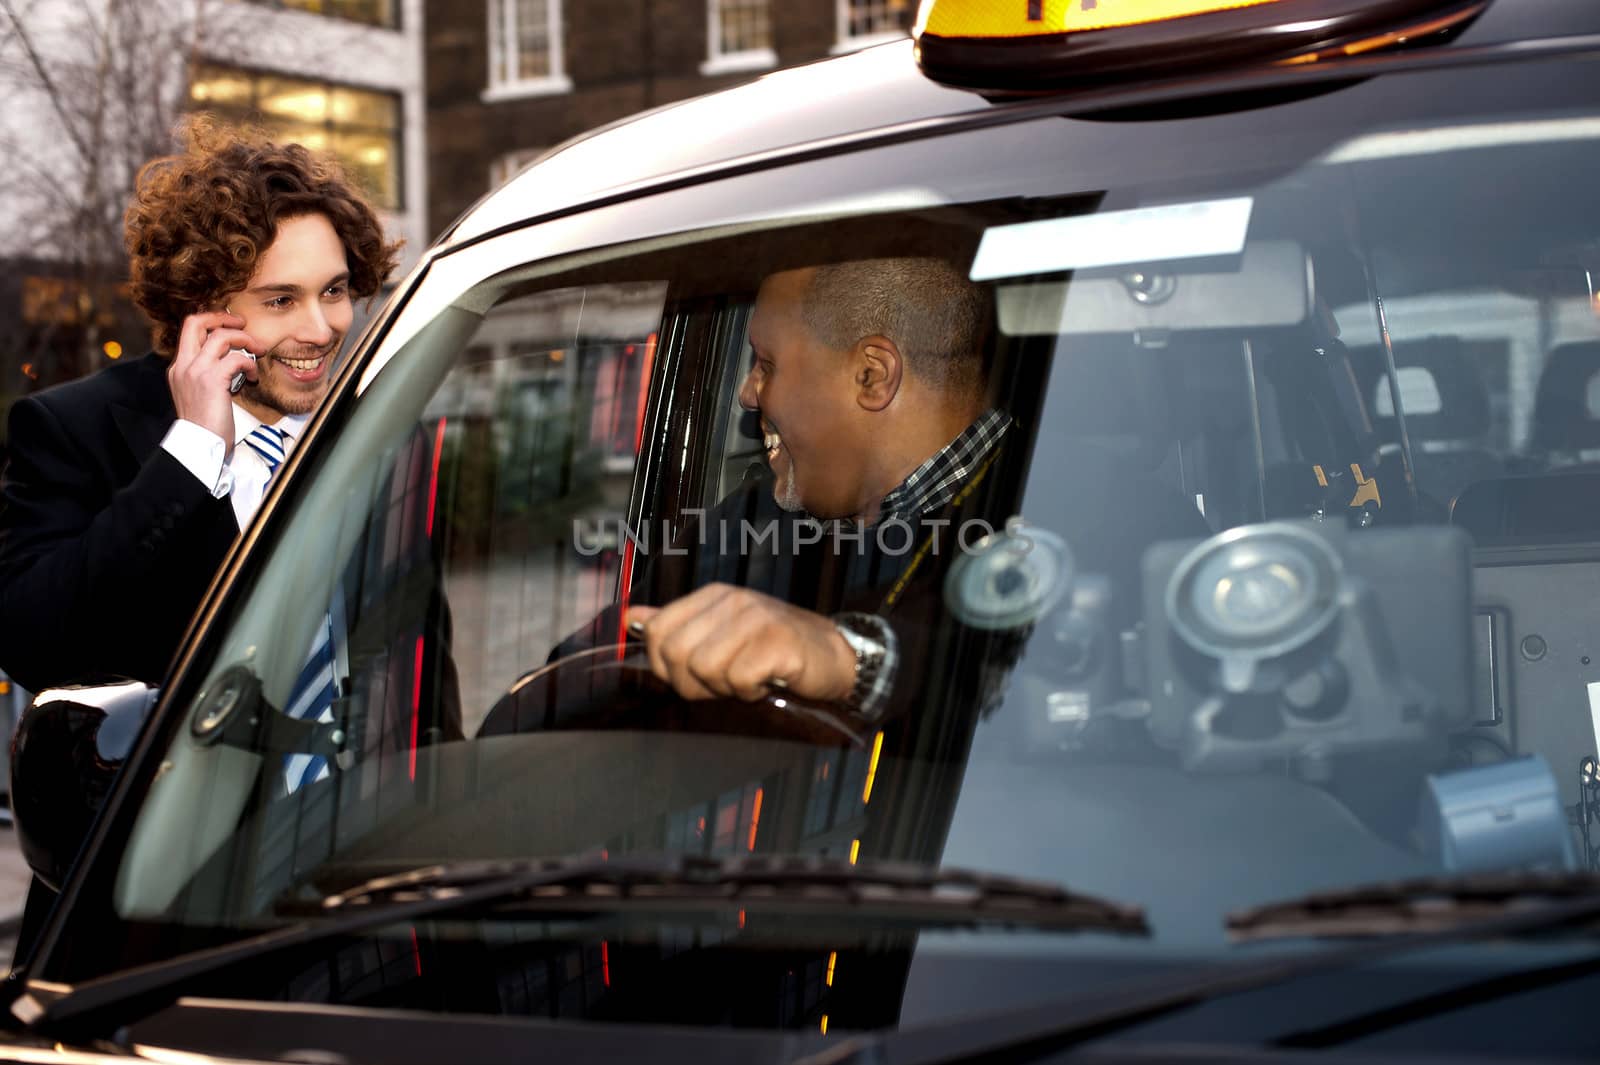 Taxi cab driver communicating with male passenger.